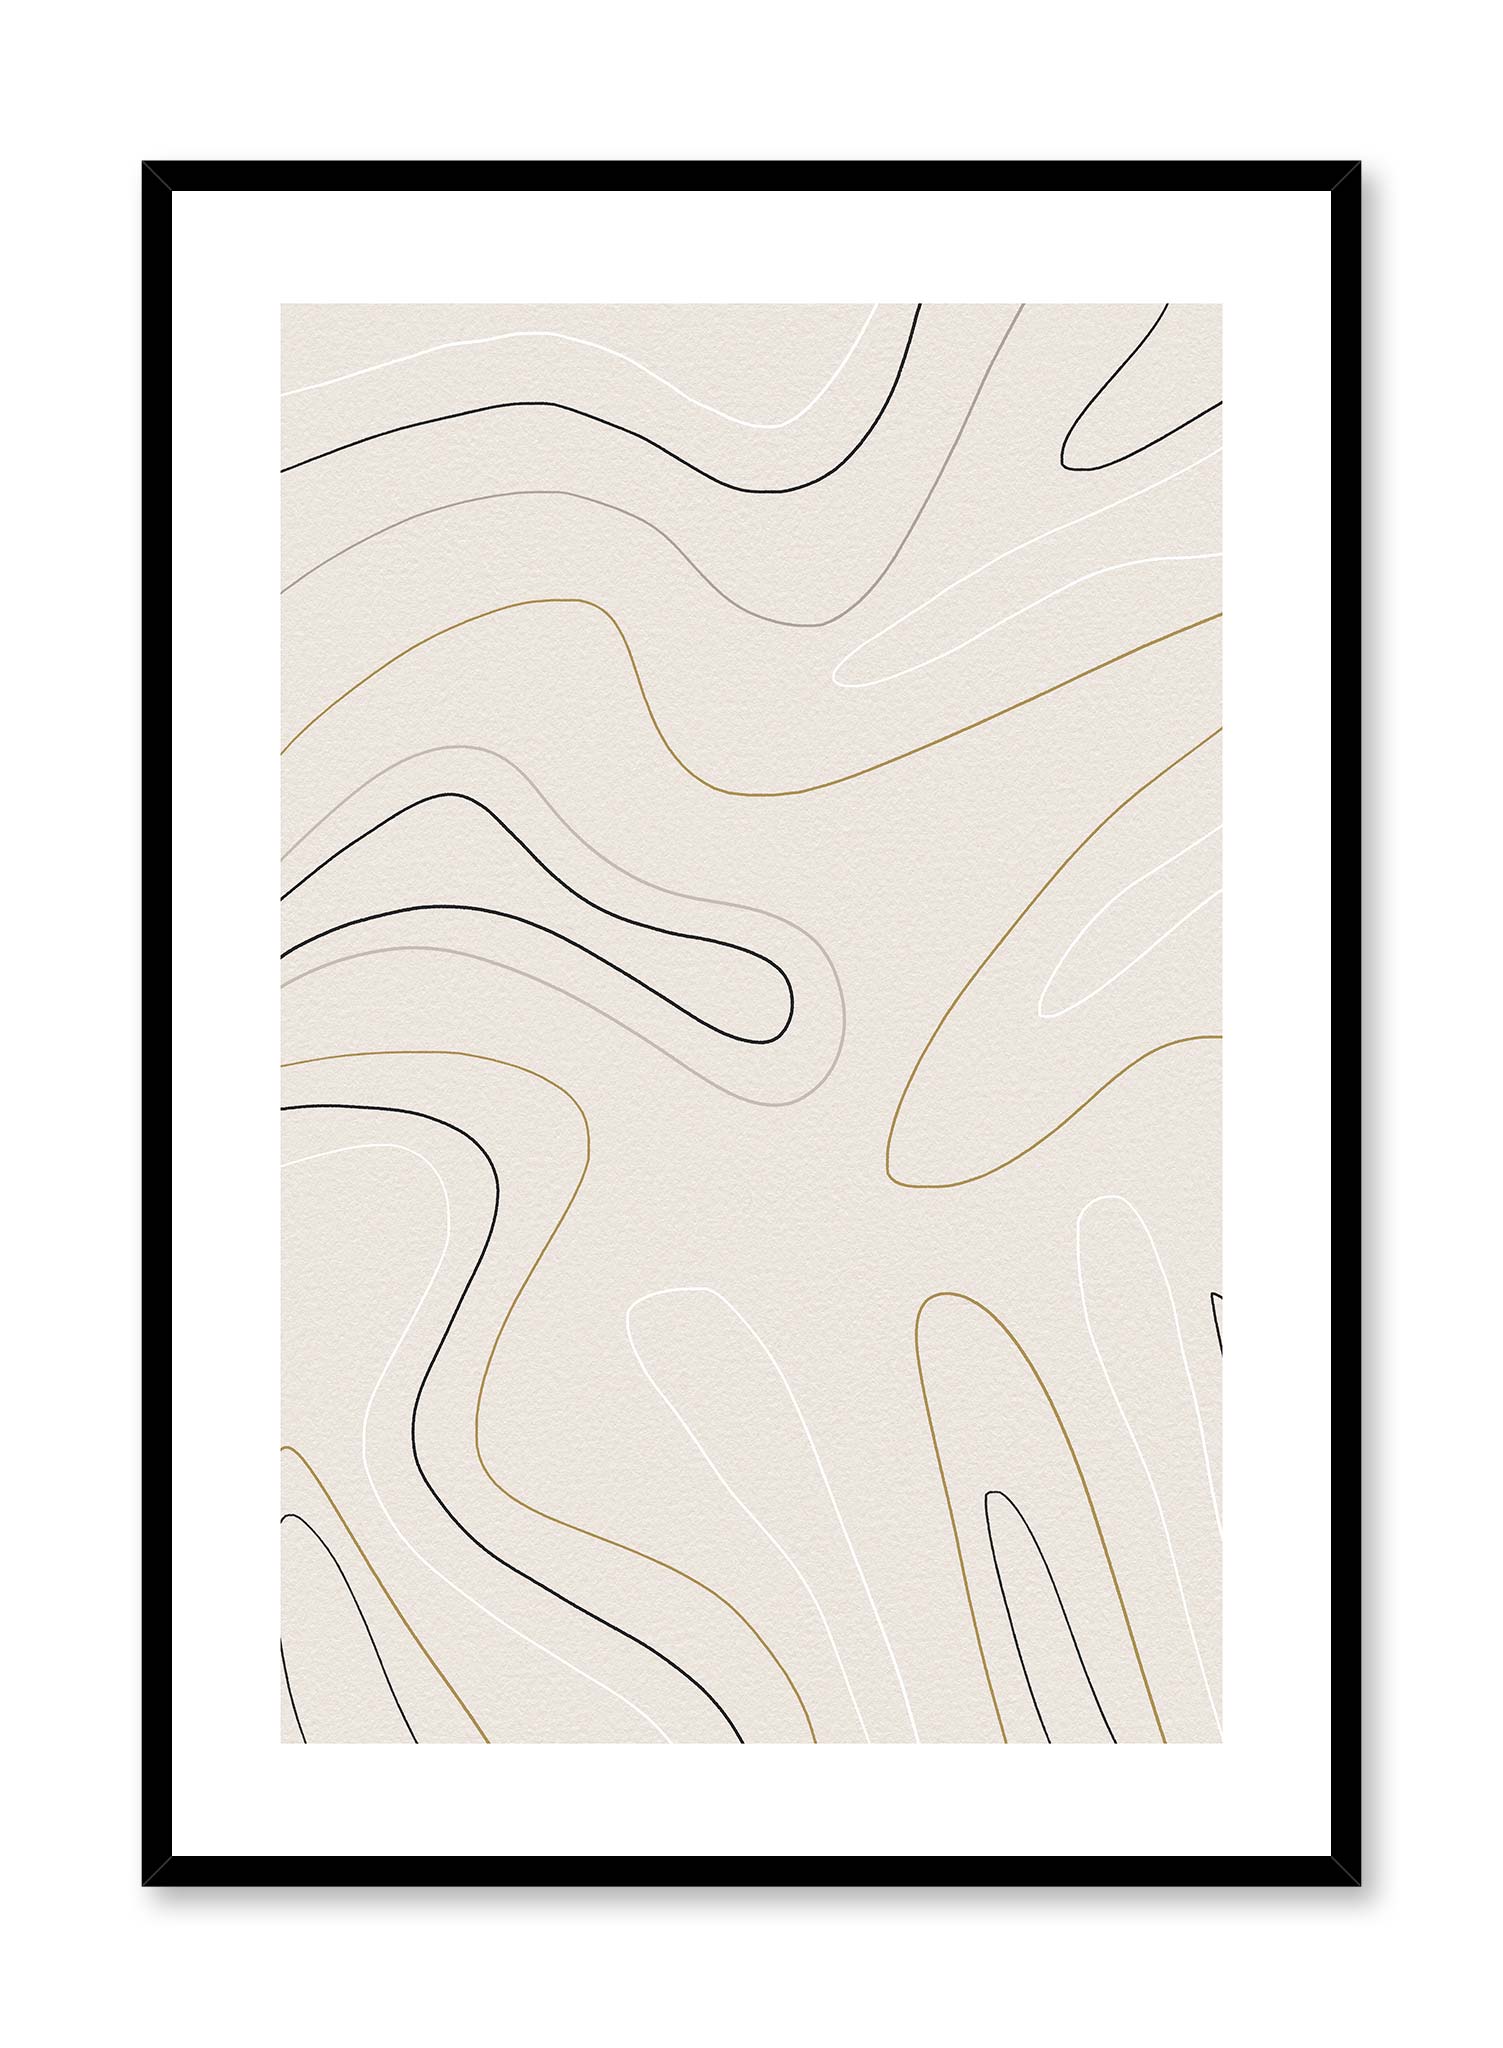 Buff Stream is a minimalist abstract illustration of curved monochrome lines by Opposite Wall.